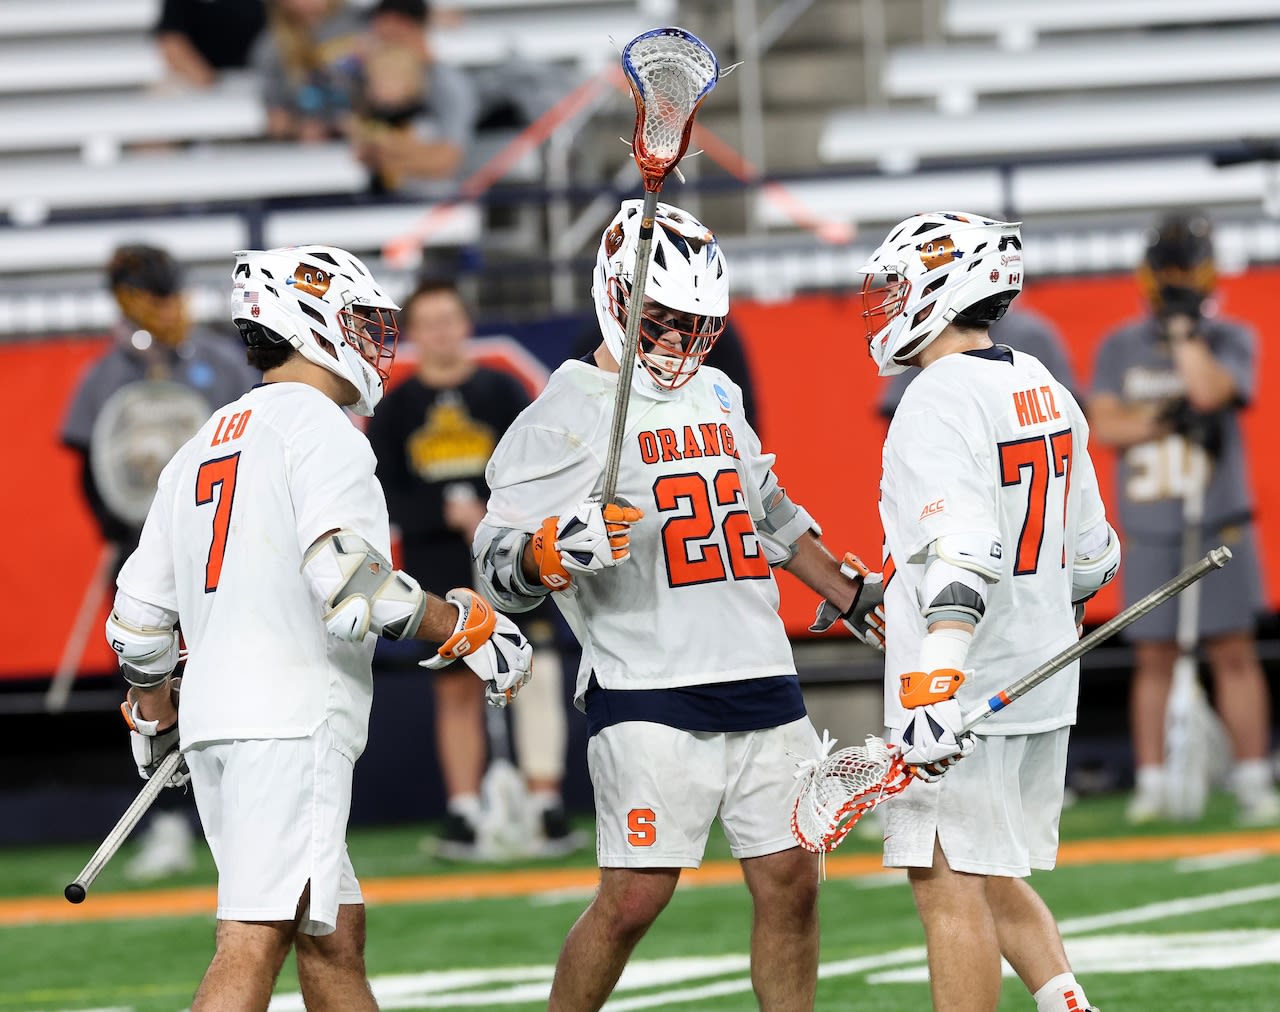 Syracuse lacrosse vs. No. 5 Denver: NCAA championship quarterfinal channel, time, how to watch